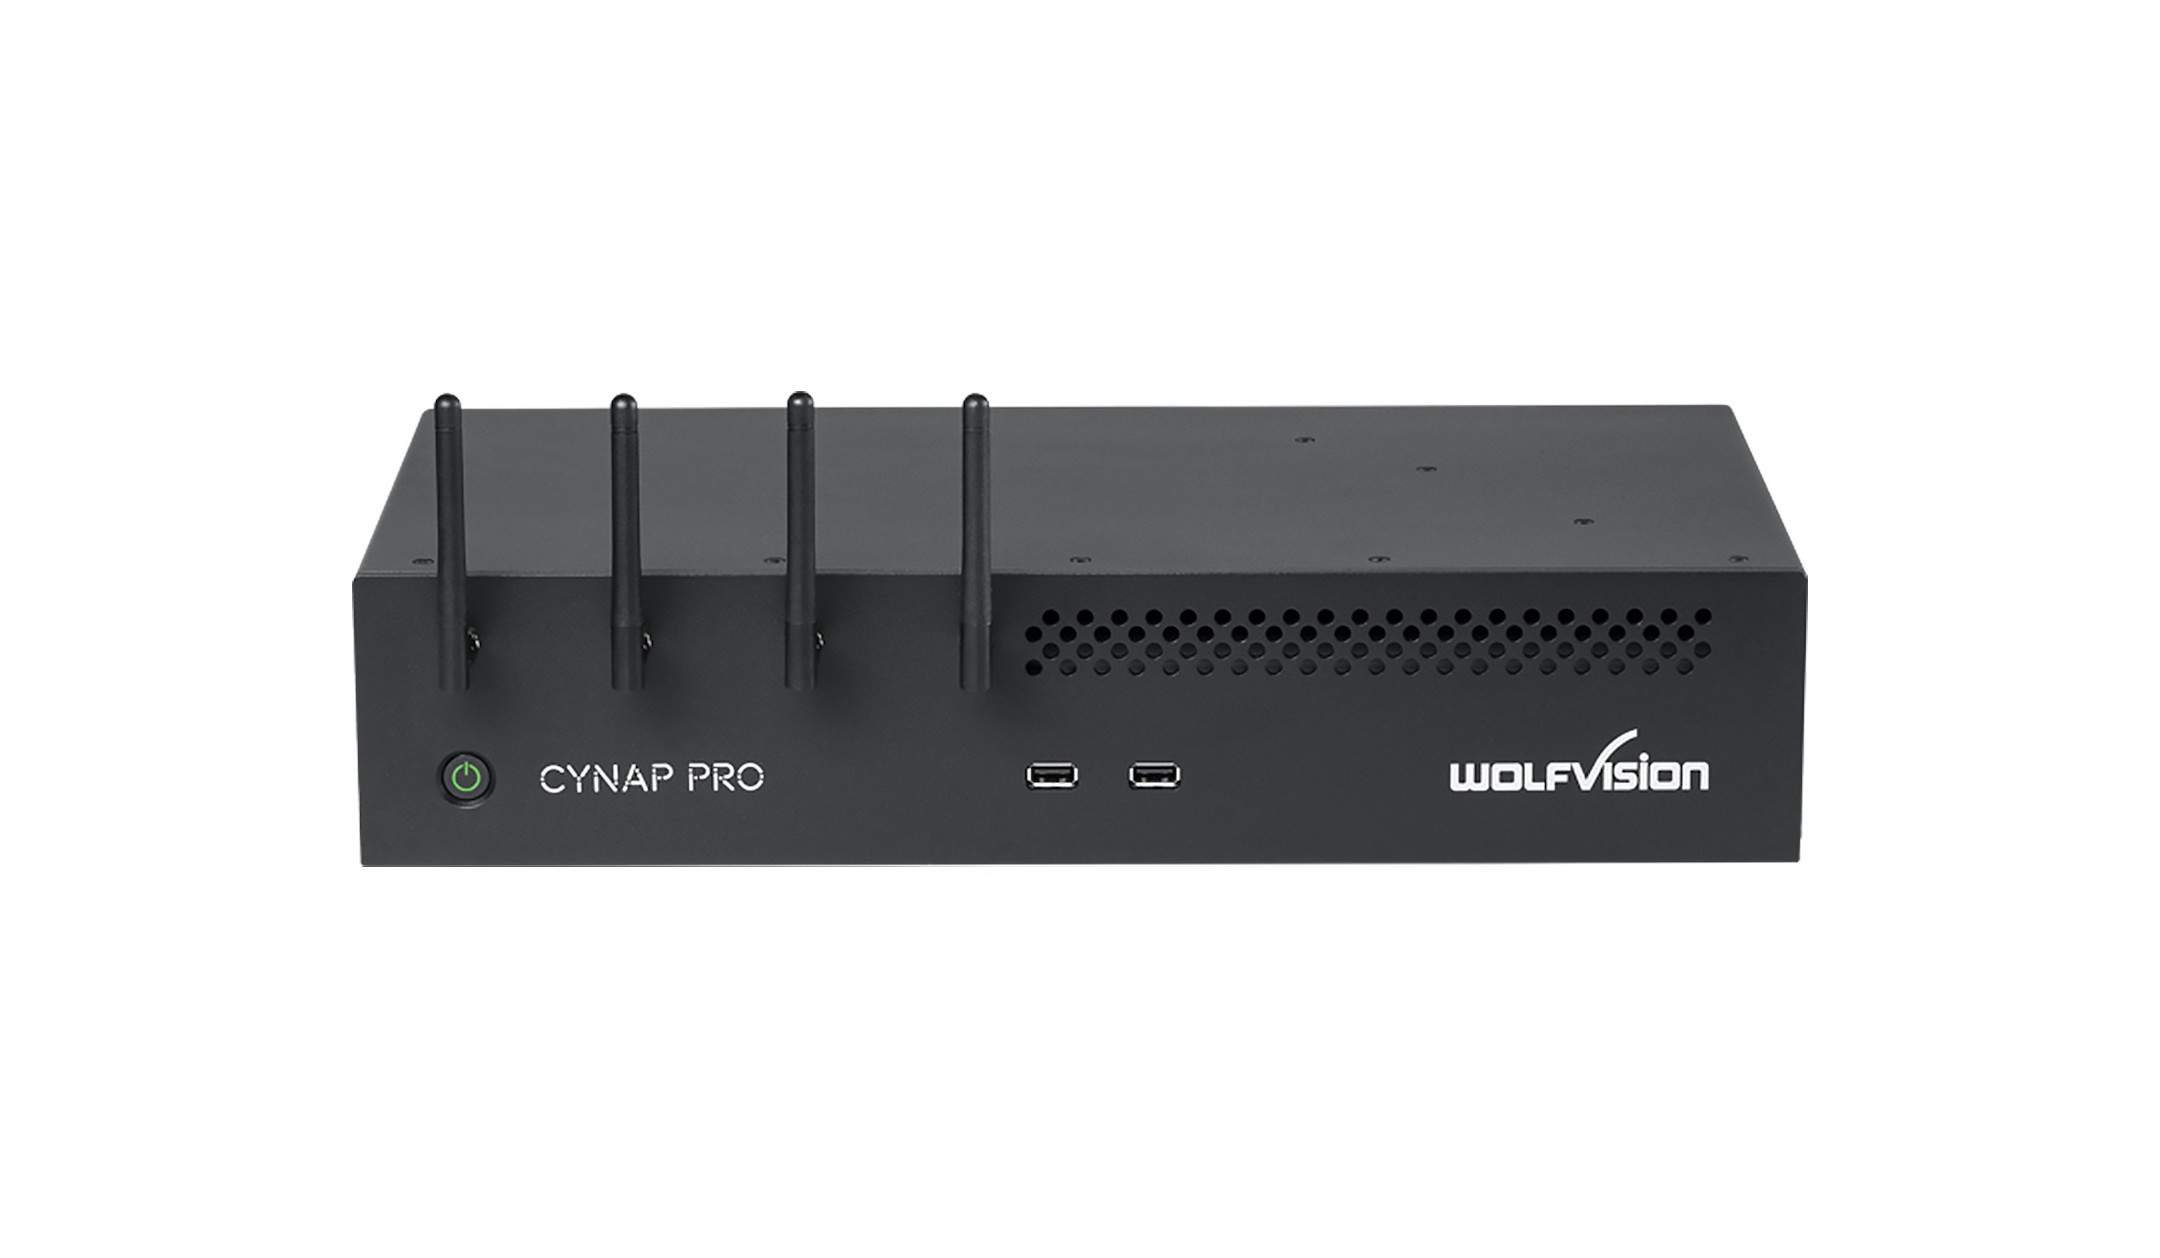 Wolfvision-Cynap-Pro-HDMI-Version-A-drahtloses-All-in-One-Prasentationssystem